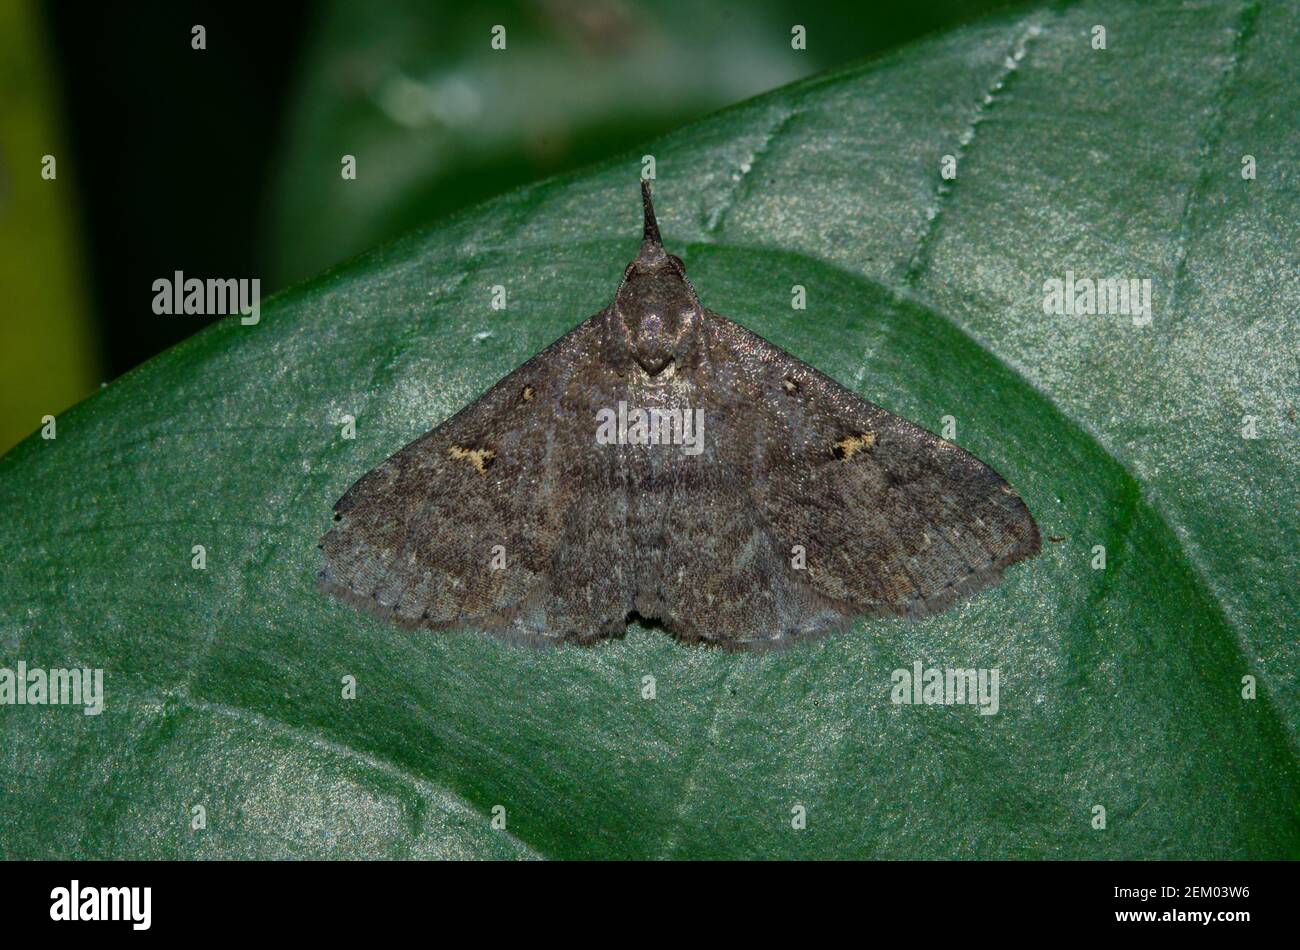 Litter Moth, Herminiinae Subfamily, on leaf, Klungkung, Bali, Indonesia Stock Photo